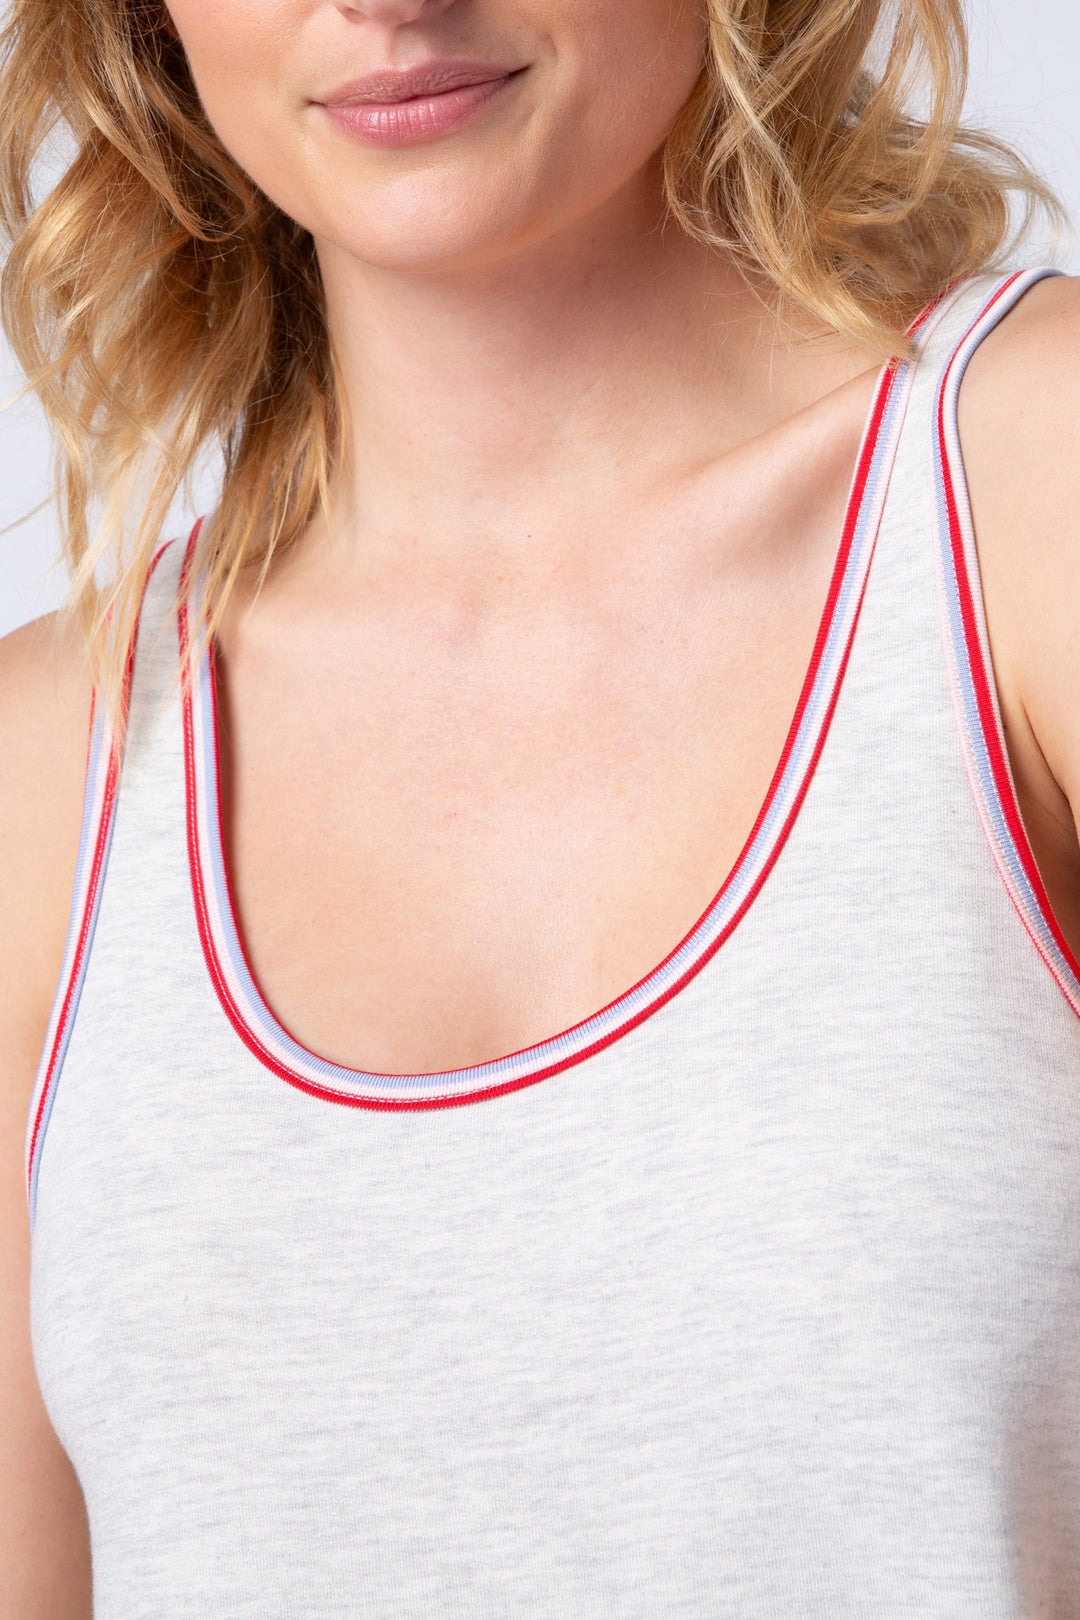 Women's light grey U-neck tank top, with red & blue piping at neck.